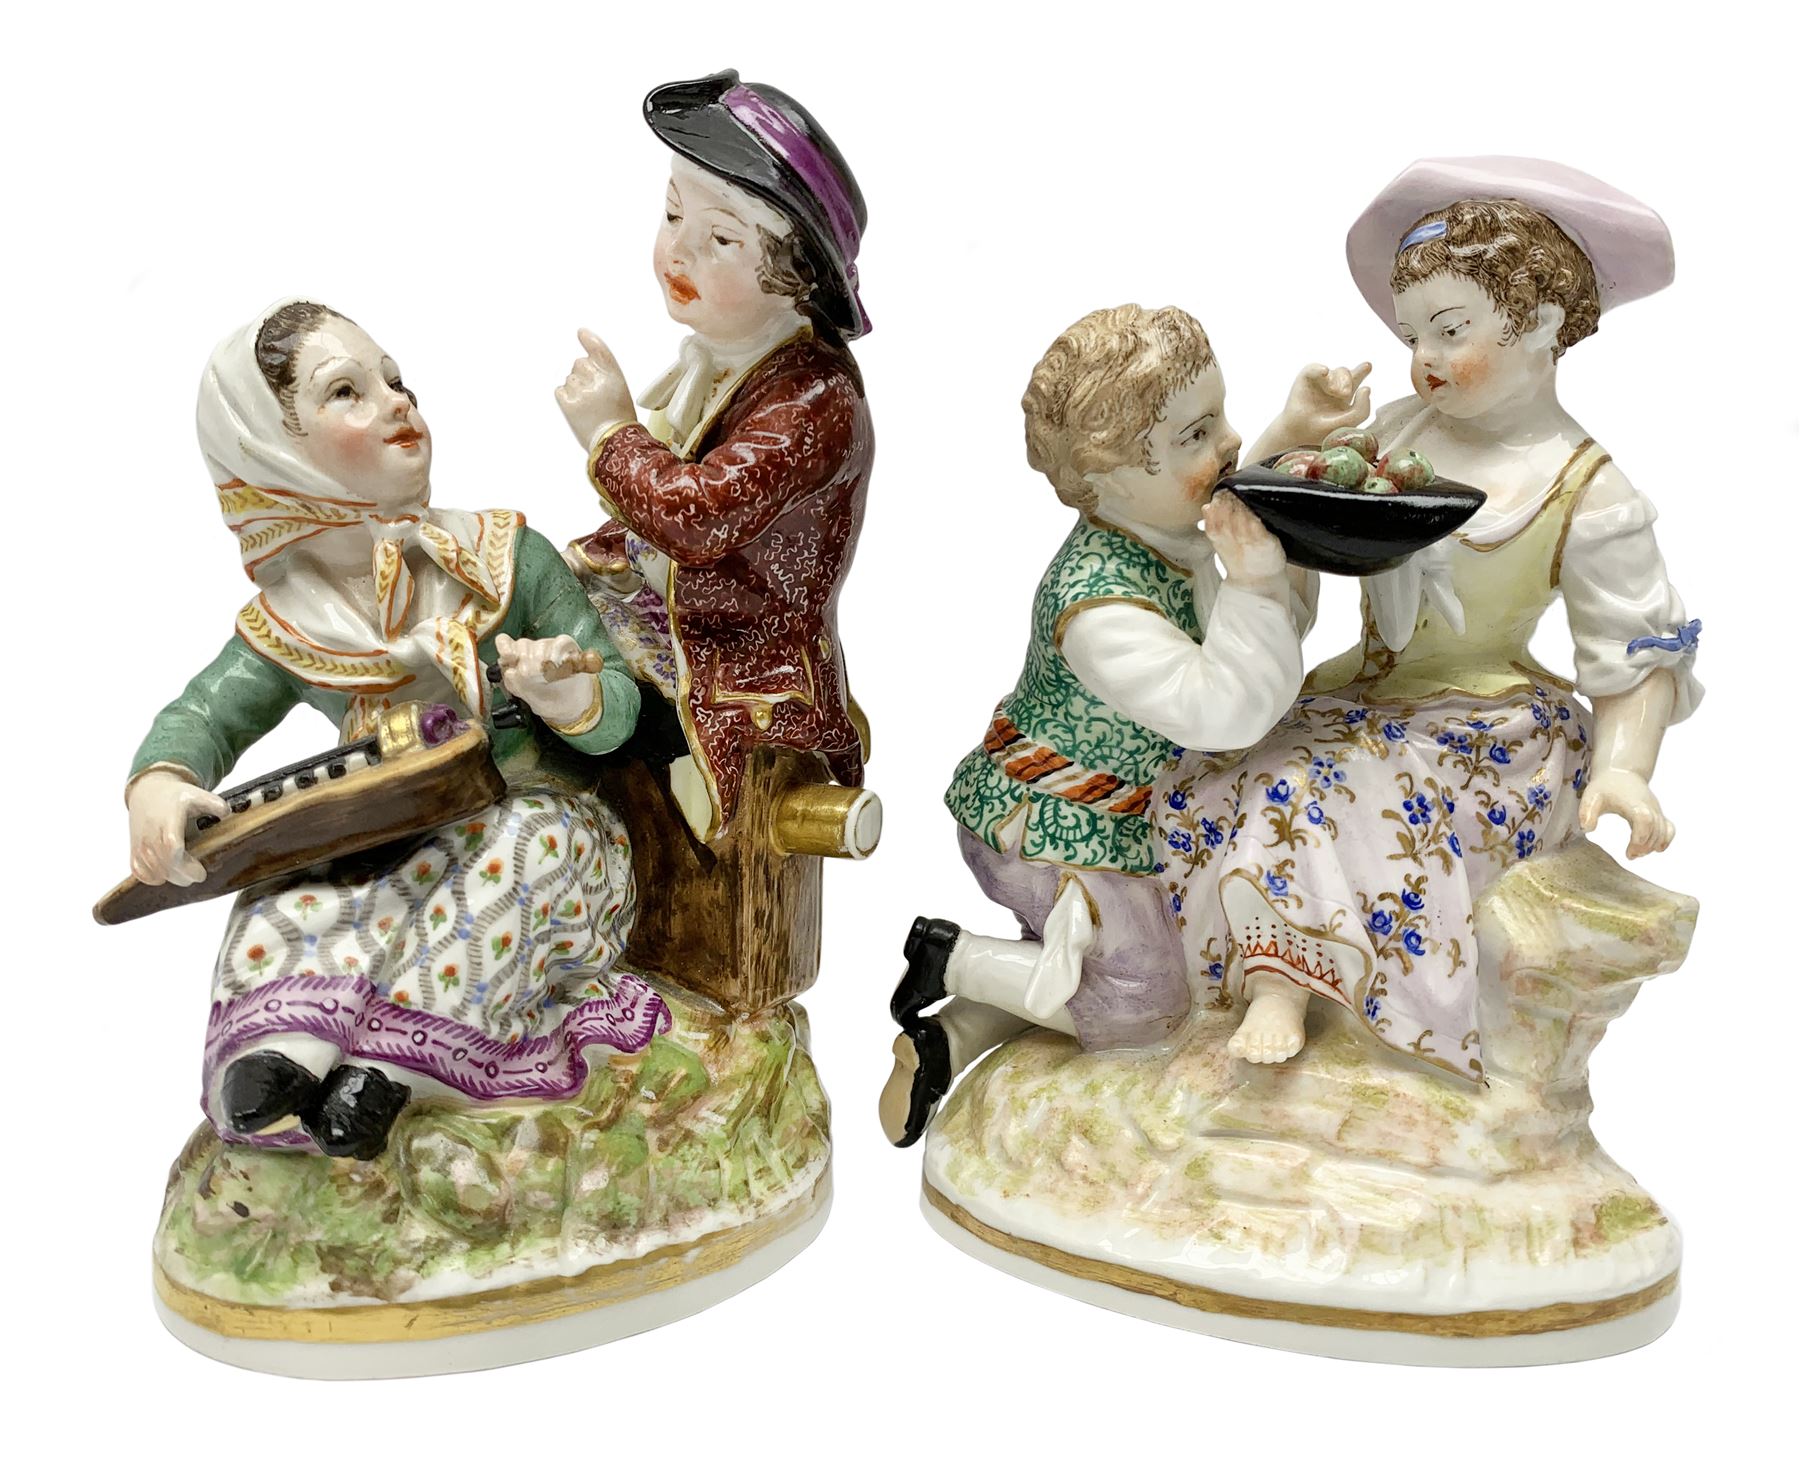 Two late 18th/early 19th century Berlin porcelain figure groups